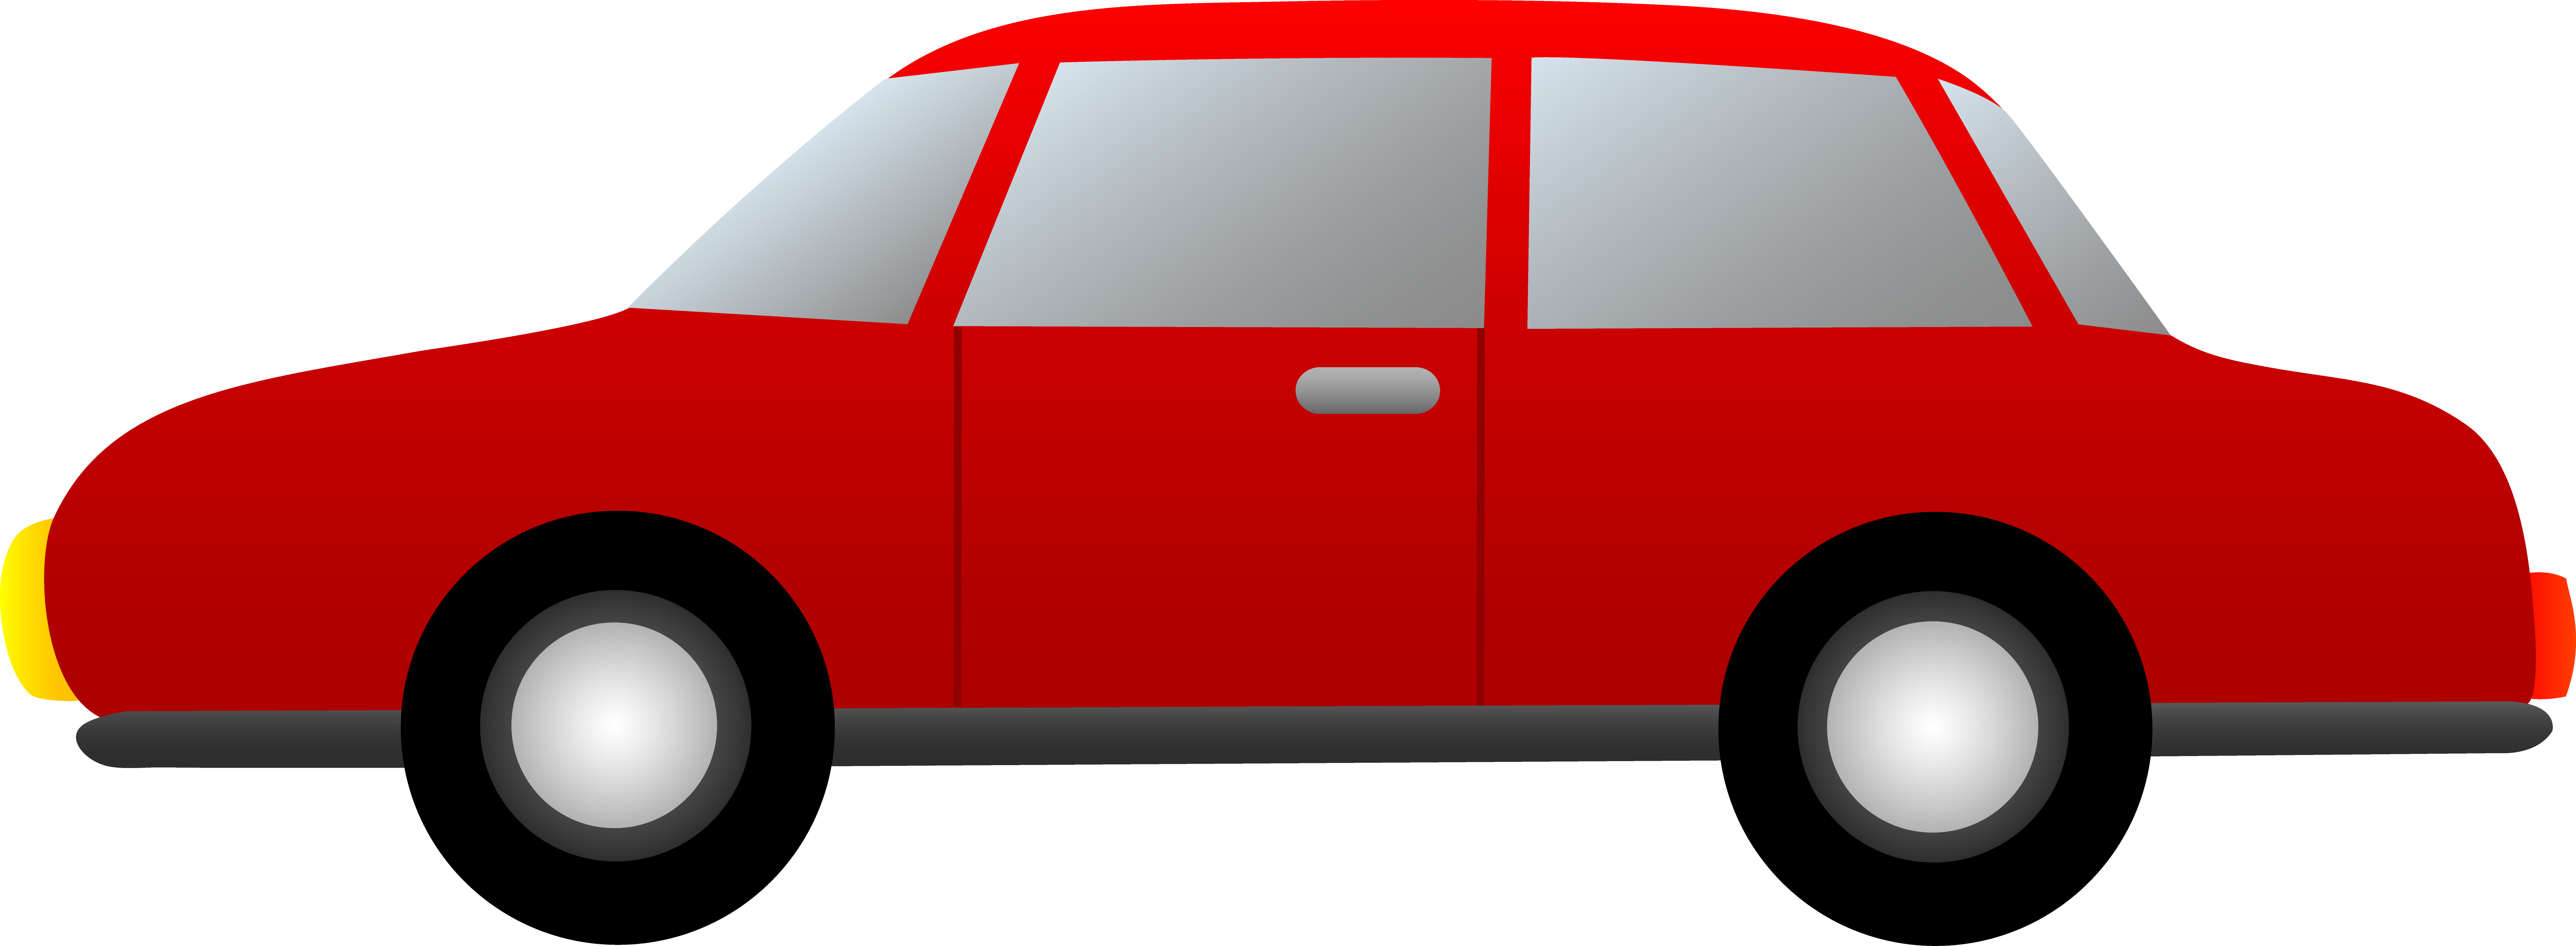 Red car clipart transparent background